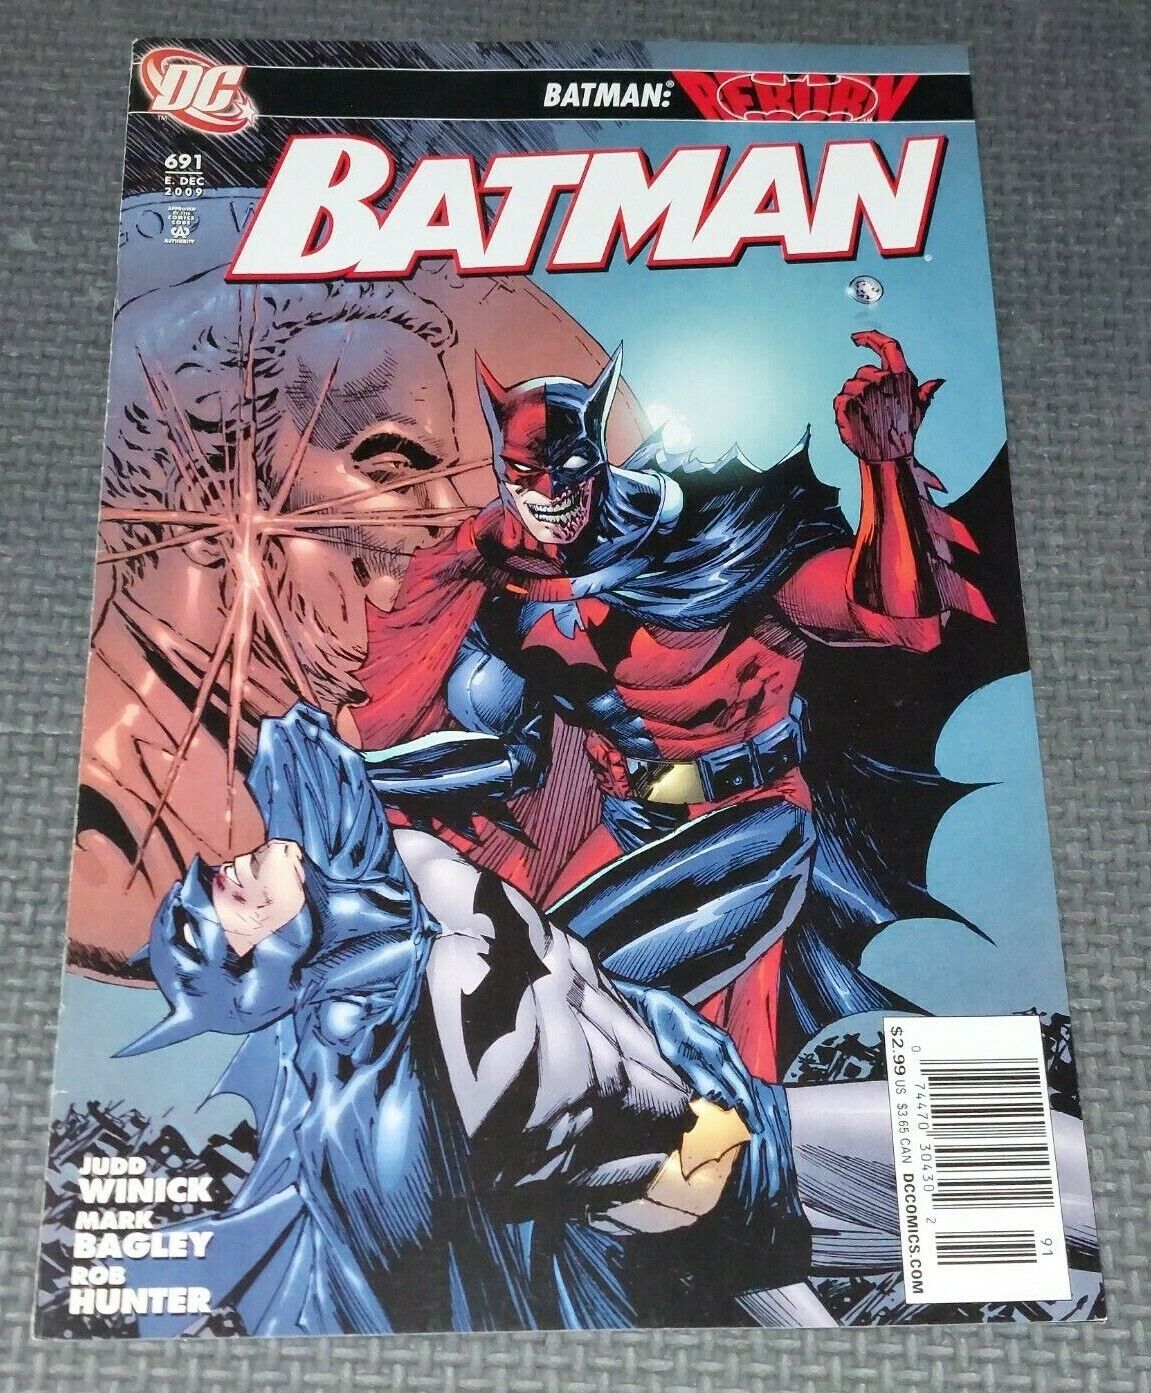 BATMAN #691 (2009) Newsstand Variant Cover Reborn Bagley Winick DC Two-Face